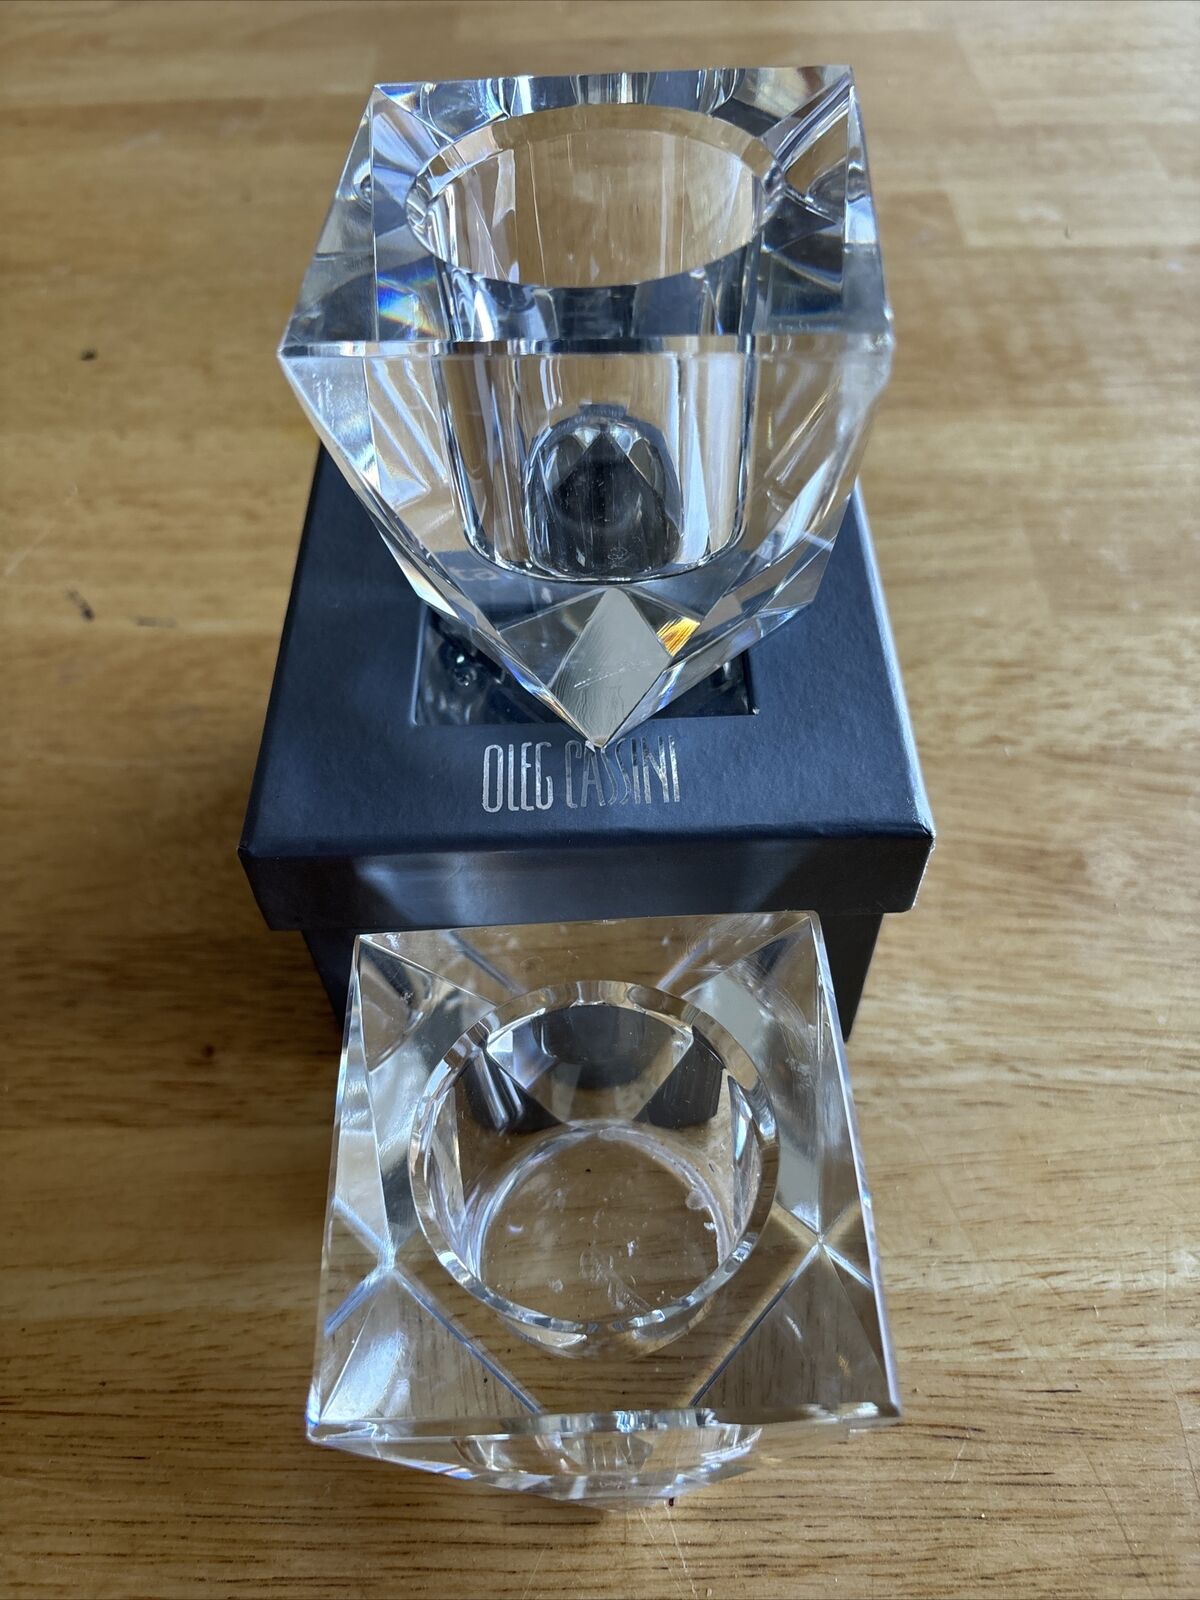 2-OLEG CASSINI  CRYSTAL VOTIVE HOLDER CLEAR 1-W/BOX- BOTH SIGNED. Sold As Pair.